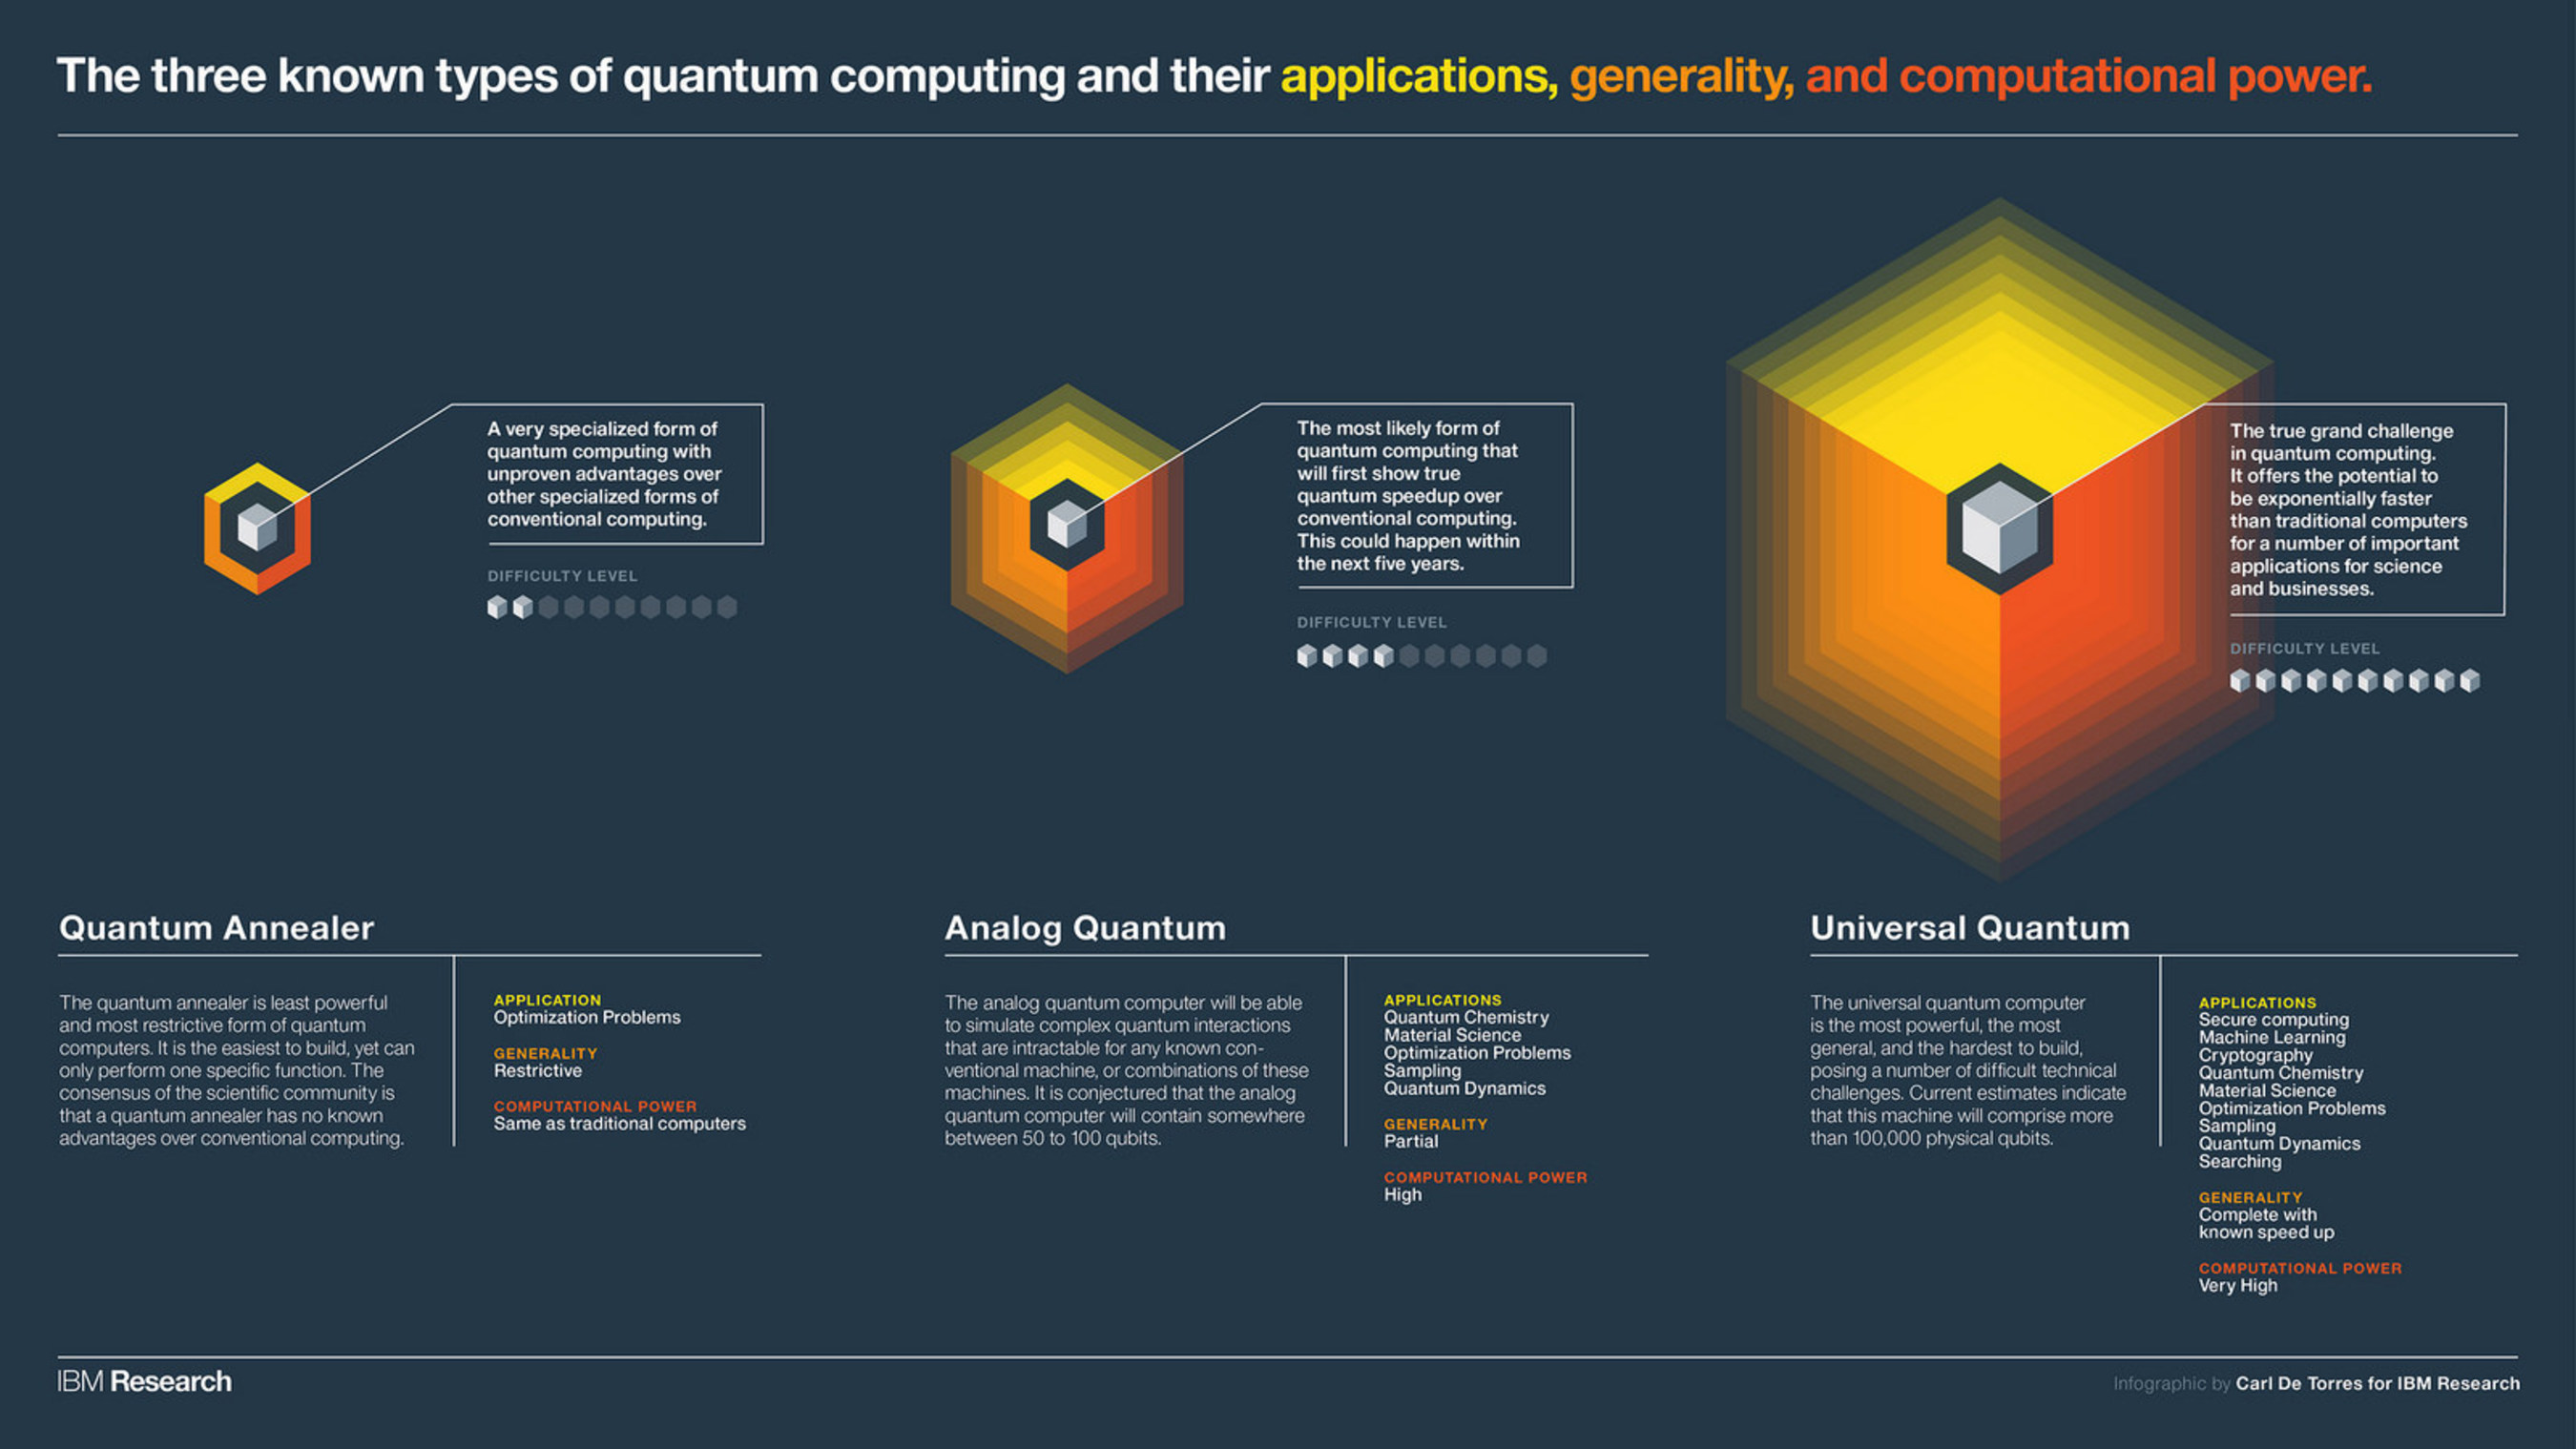 IBM Infographic - The three known types of quantum computing and their applications, generality, and computational power.